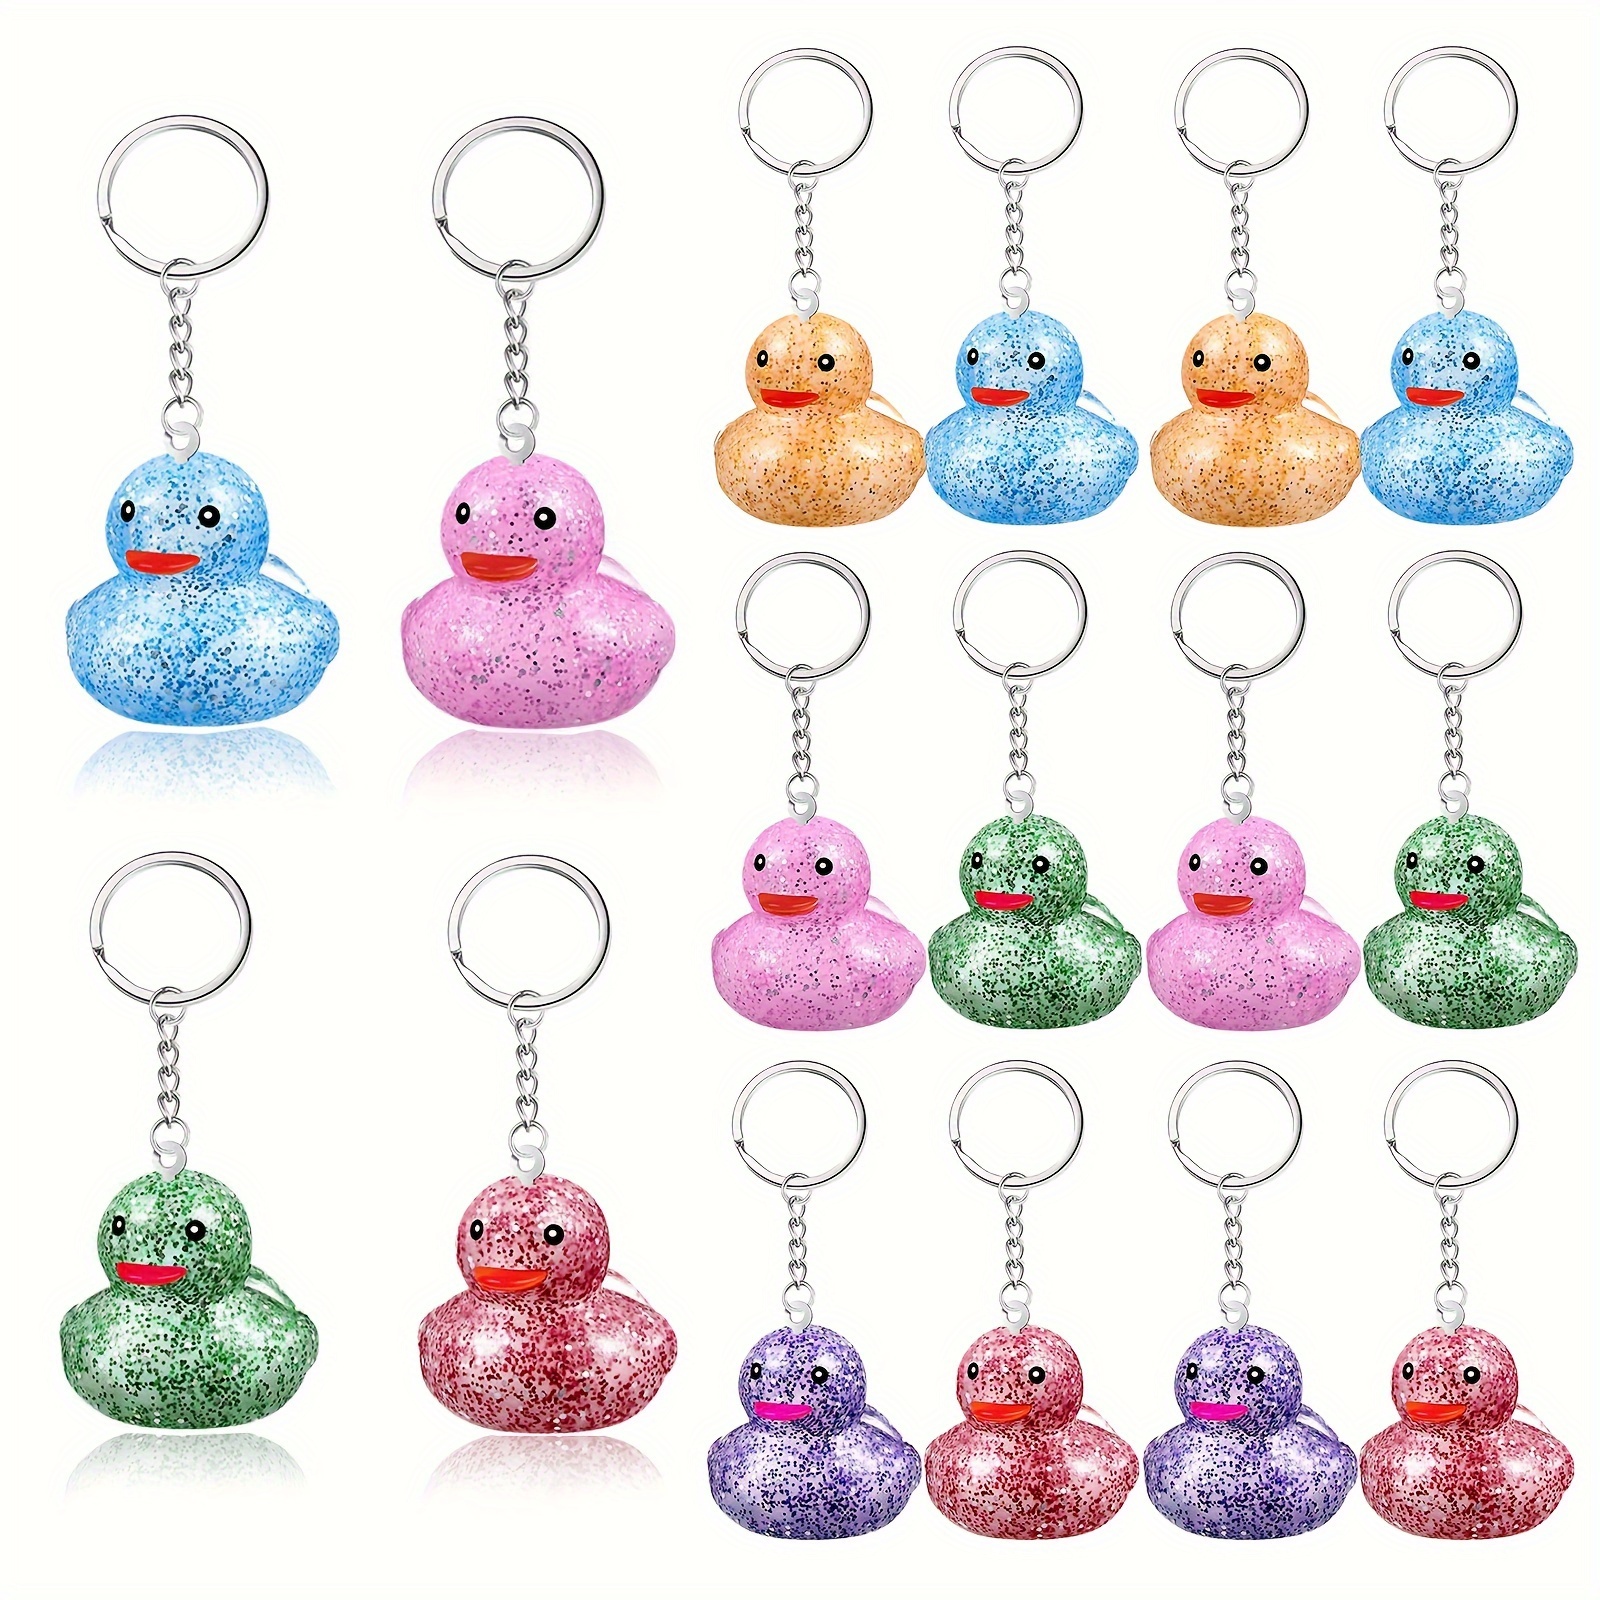 

12-pack Glitter Rubber Duck Keychains - Assorted Mini Duckling Key Rings For Birthday, Wedding, And Bridal Shower Party Favors - Non-electric, Featherless Rubber Duckies For Guests, Teens & Adults 14+